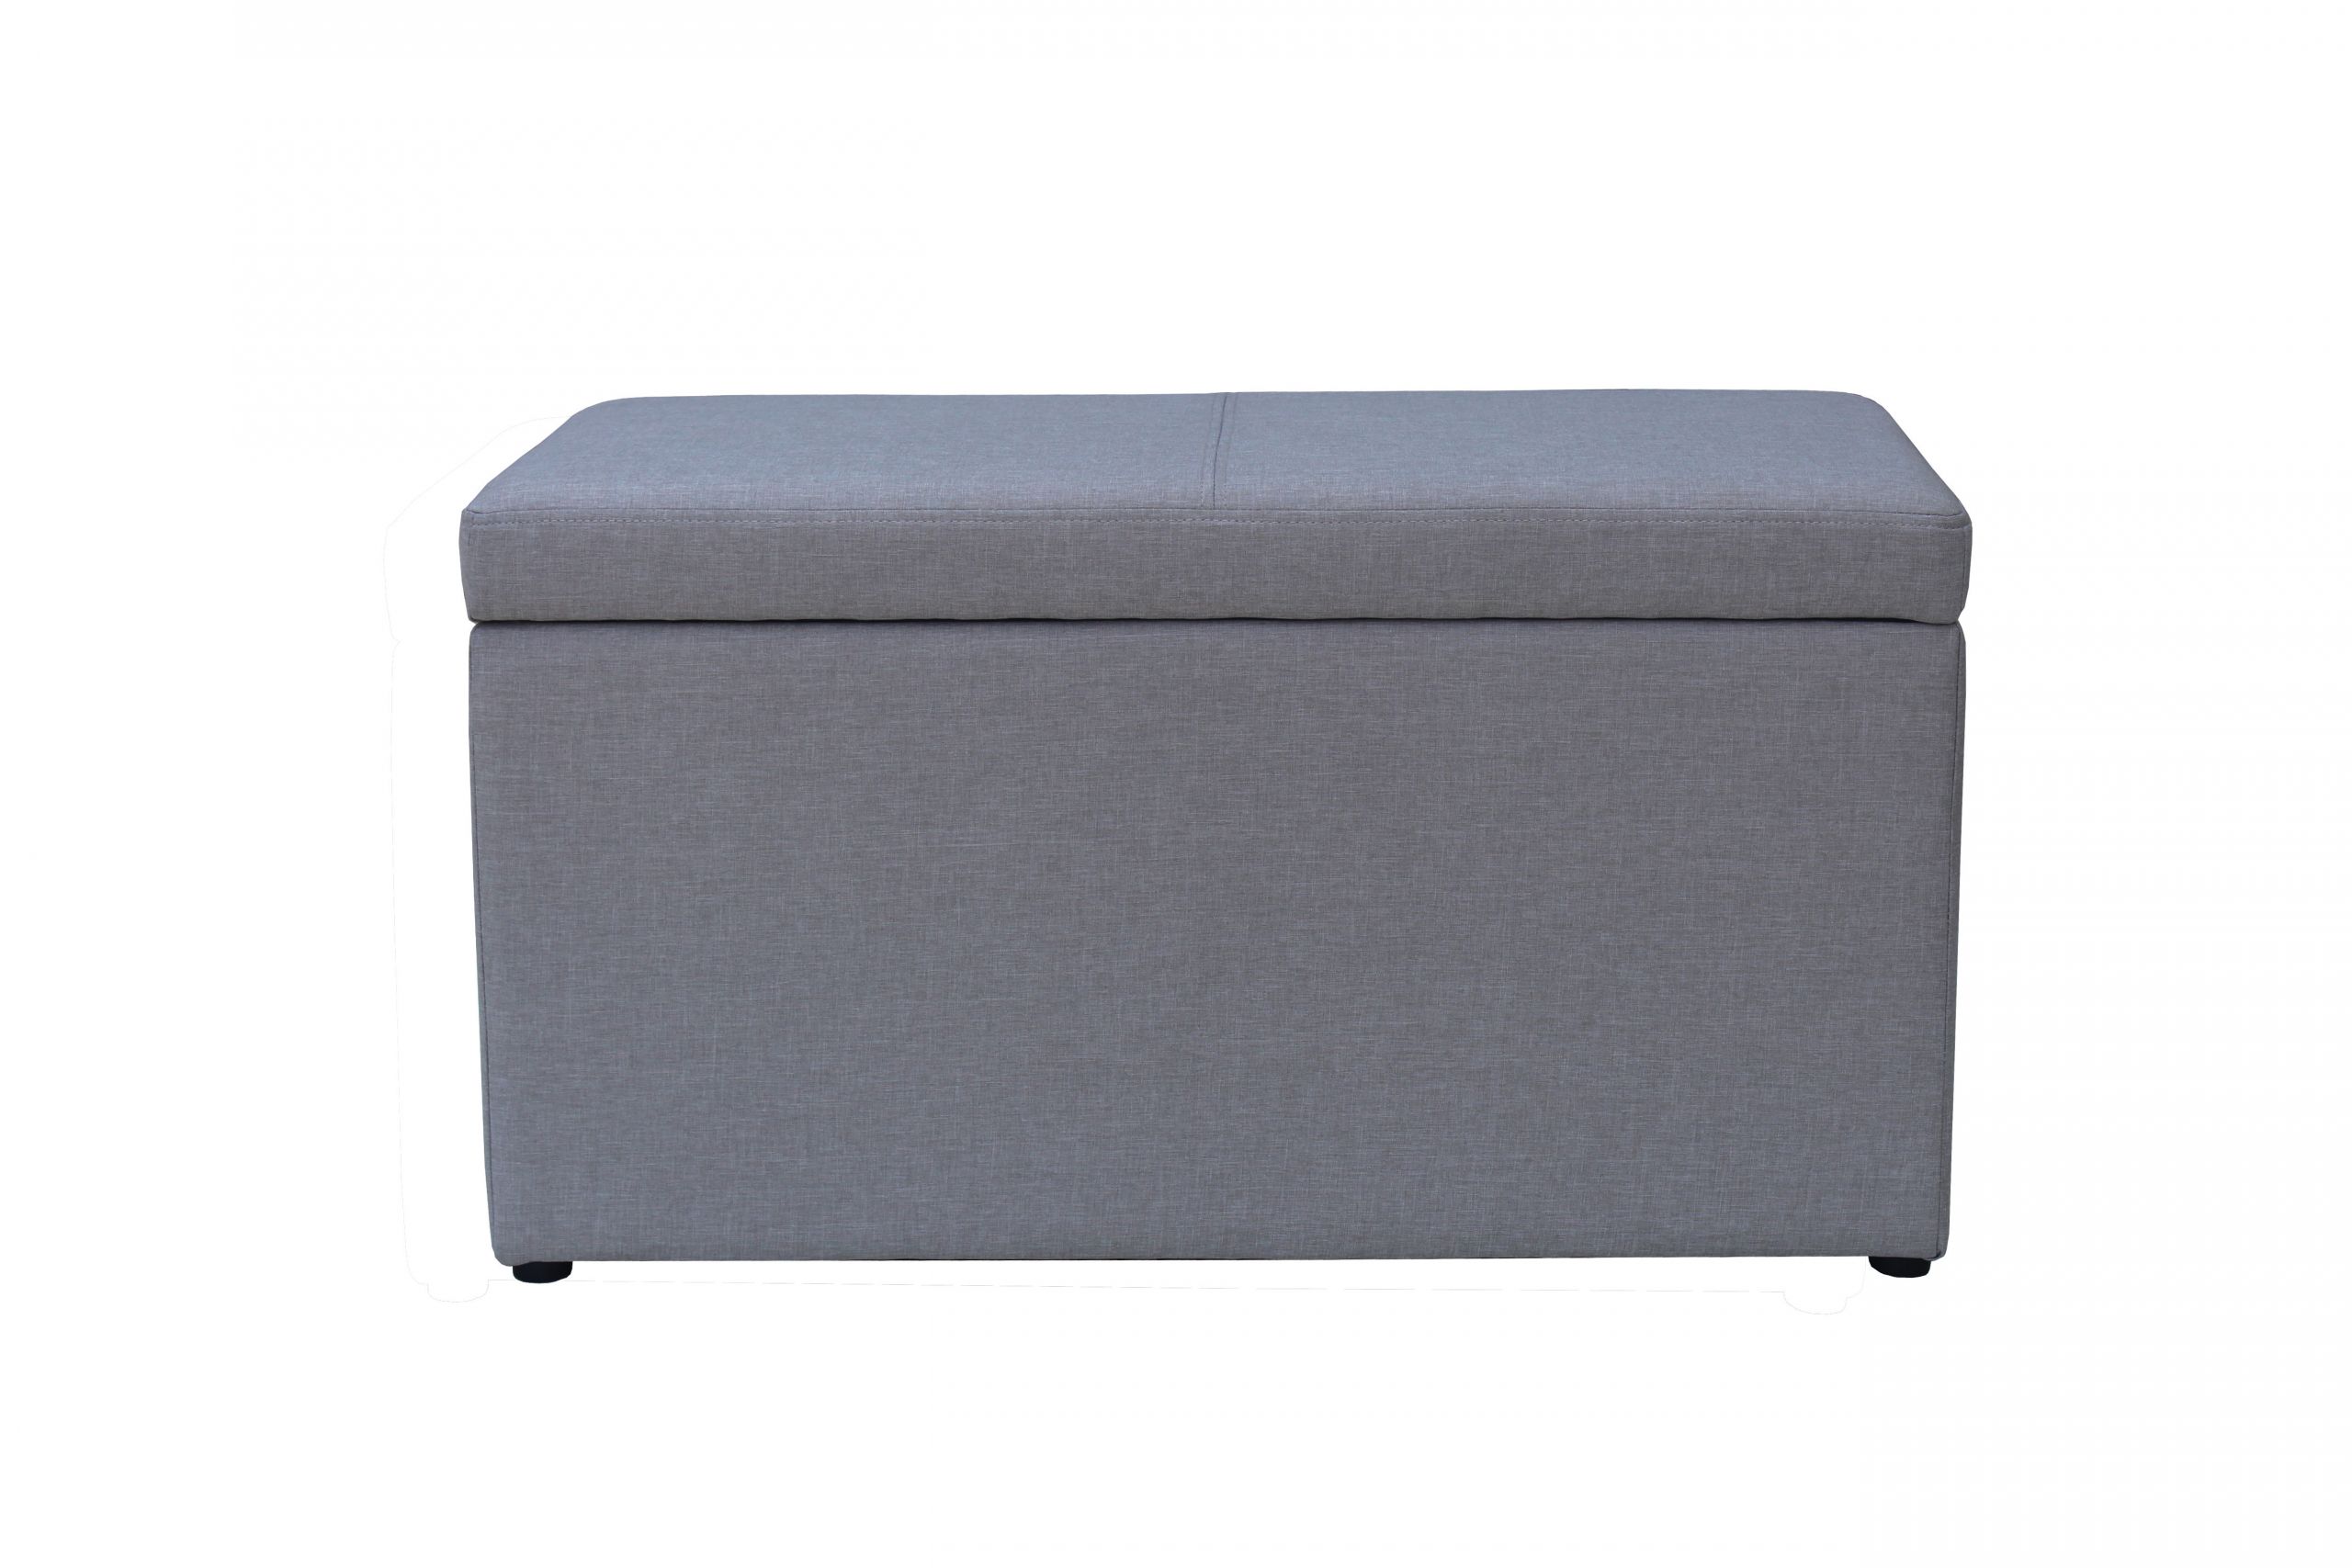 Kids Room Ottoman
 Storage Ottoman Bench Hinged Lid Rectangle Foot Rest Lift